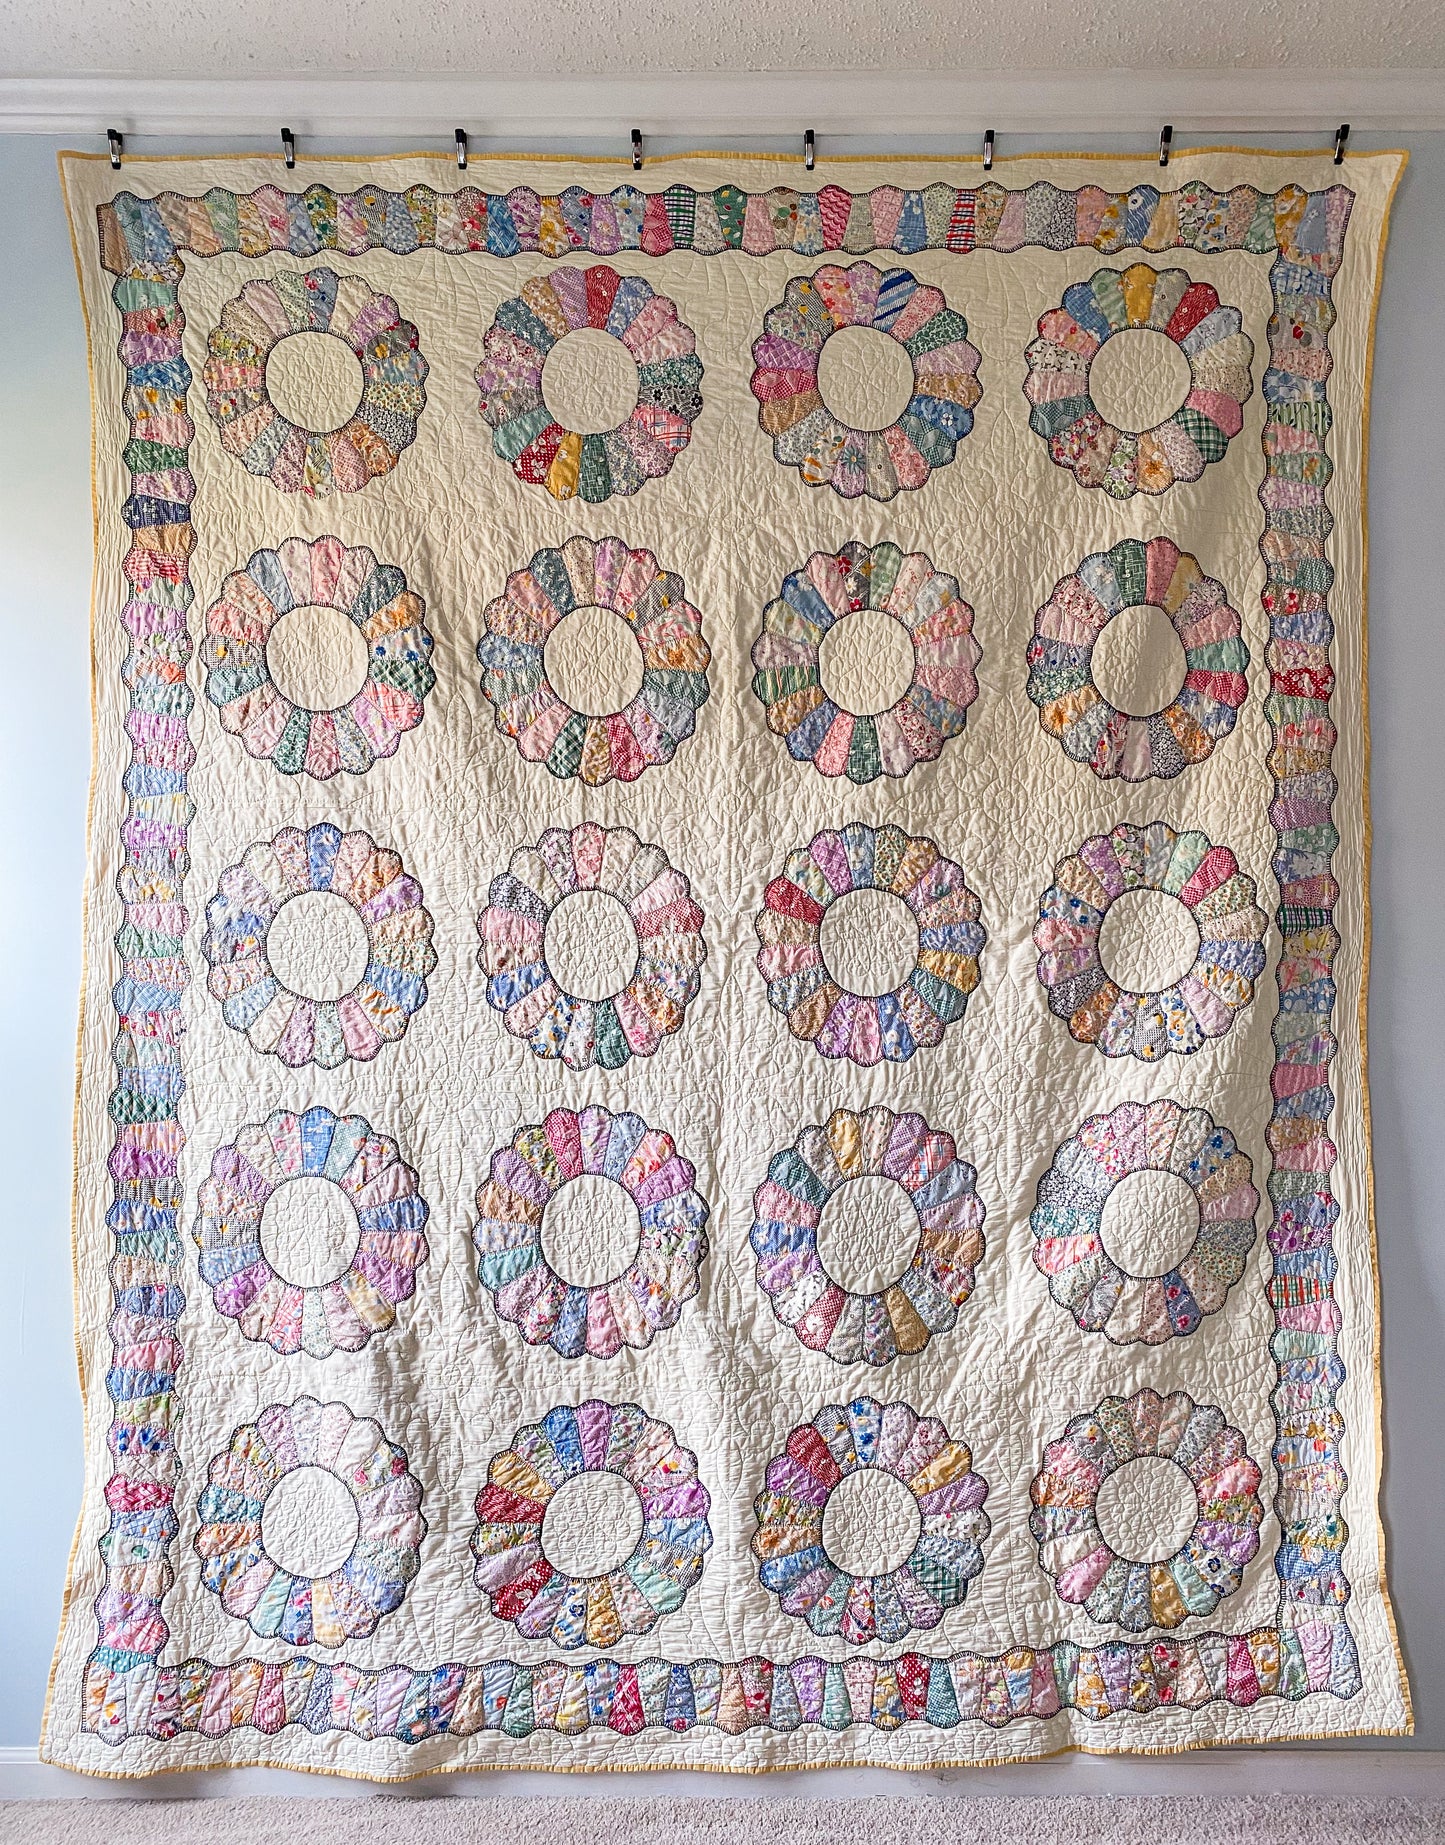 Vintage Yellow Dresden Plate Quilt with Blanket Stitching, c1930